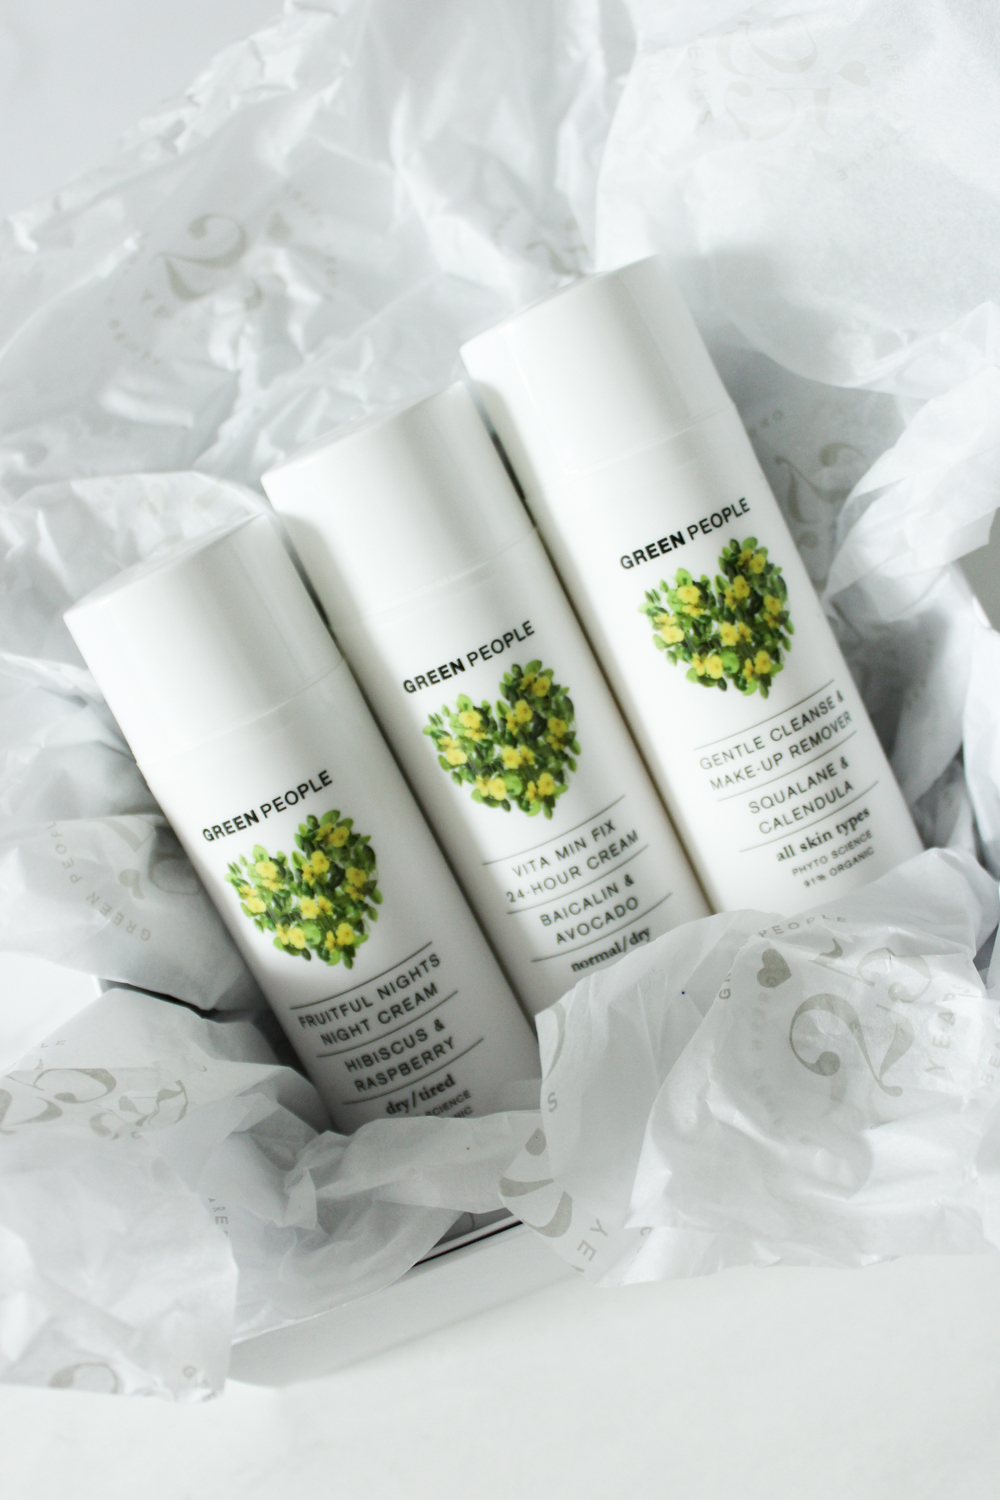 Green People Heritage Beauty Trio products